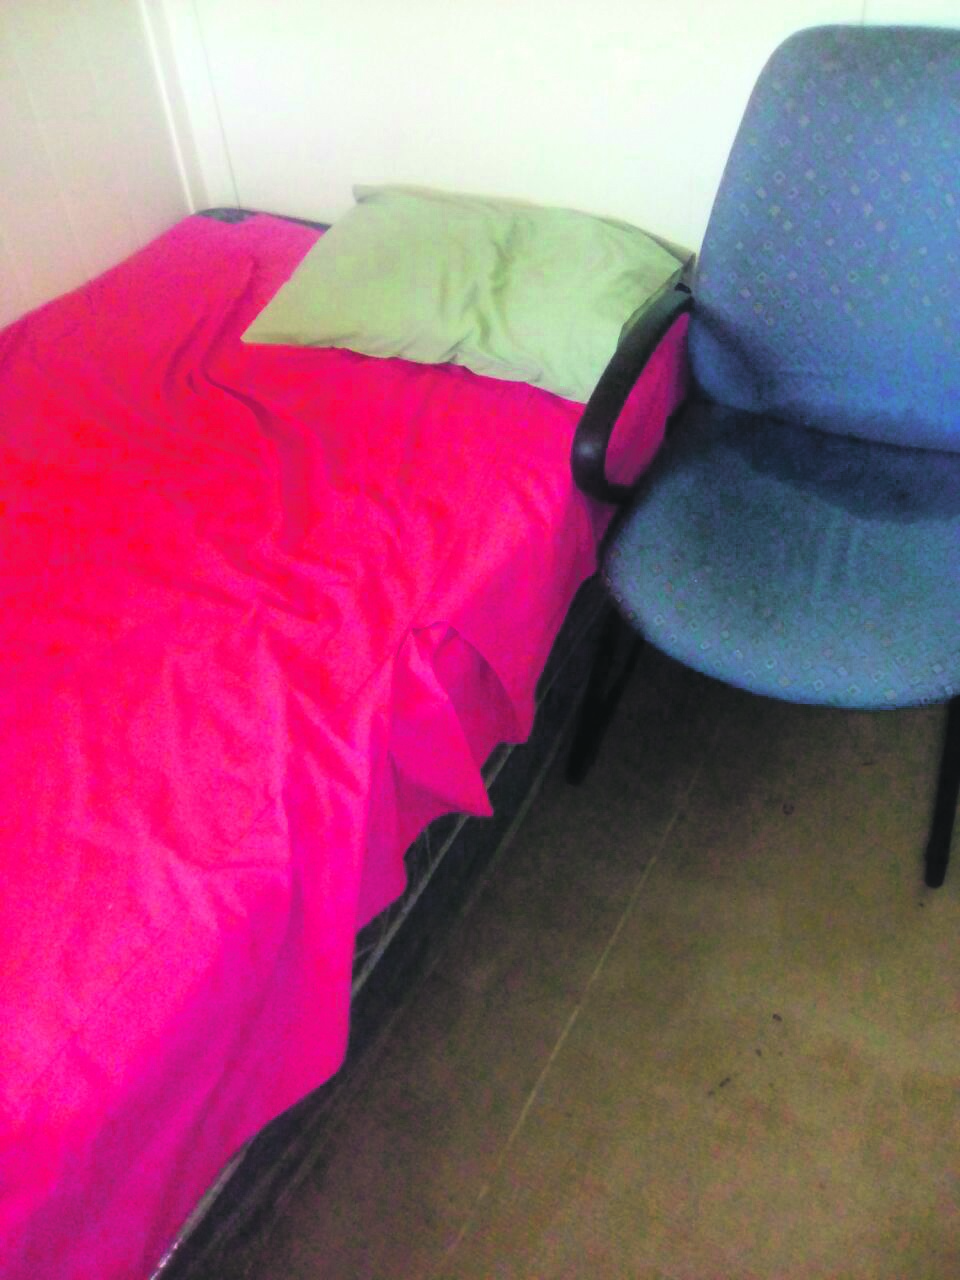 Two teachers were allegedly found bonking in this sick room at Kaalfontein Secondary School. 